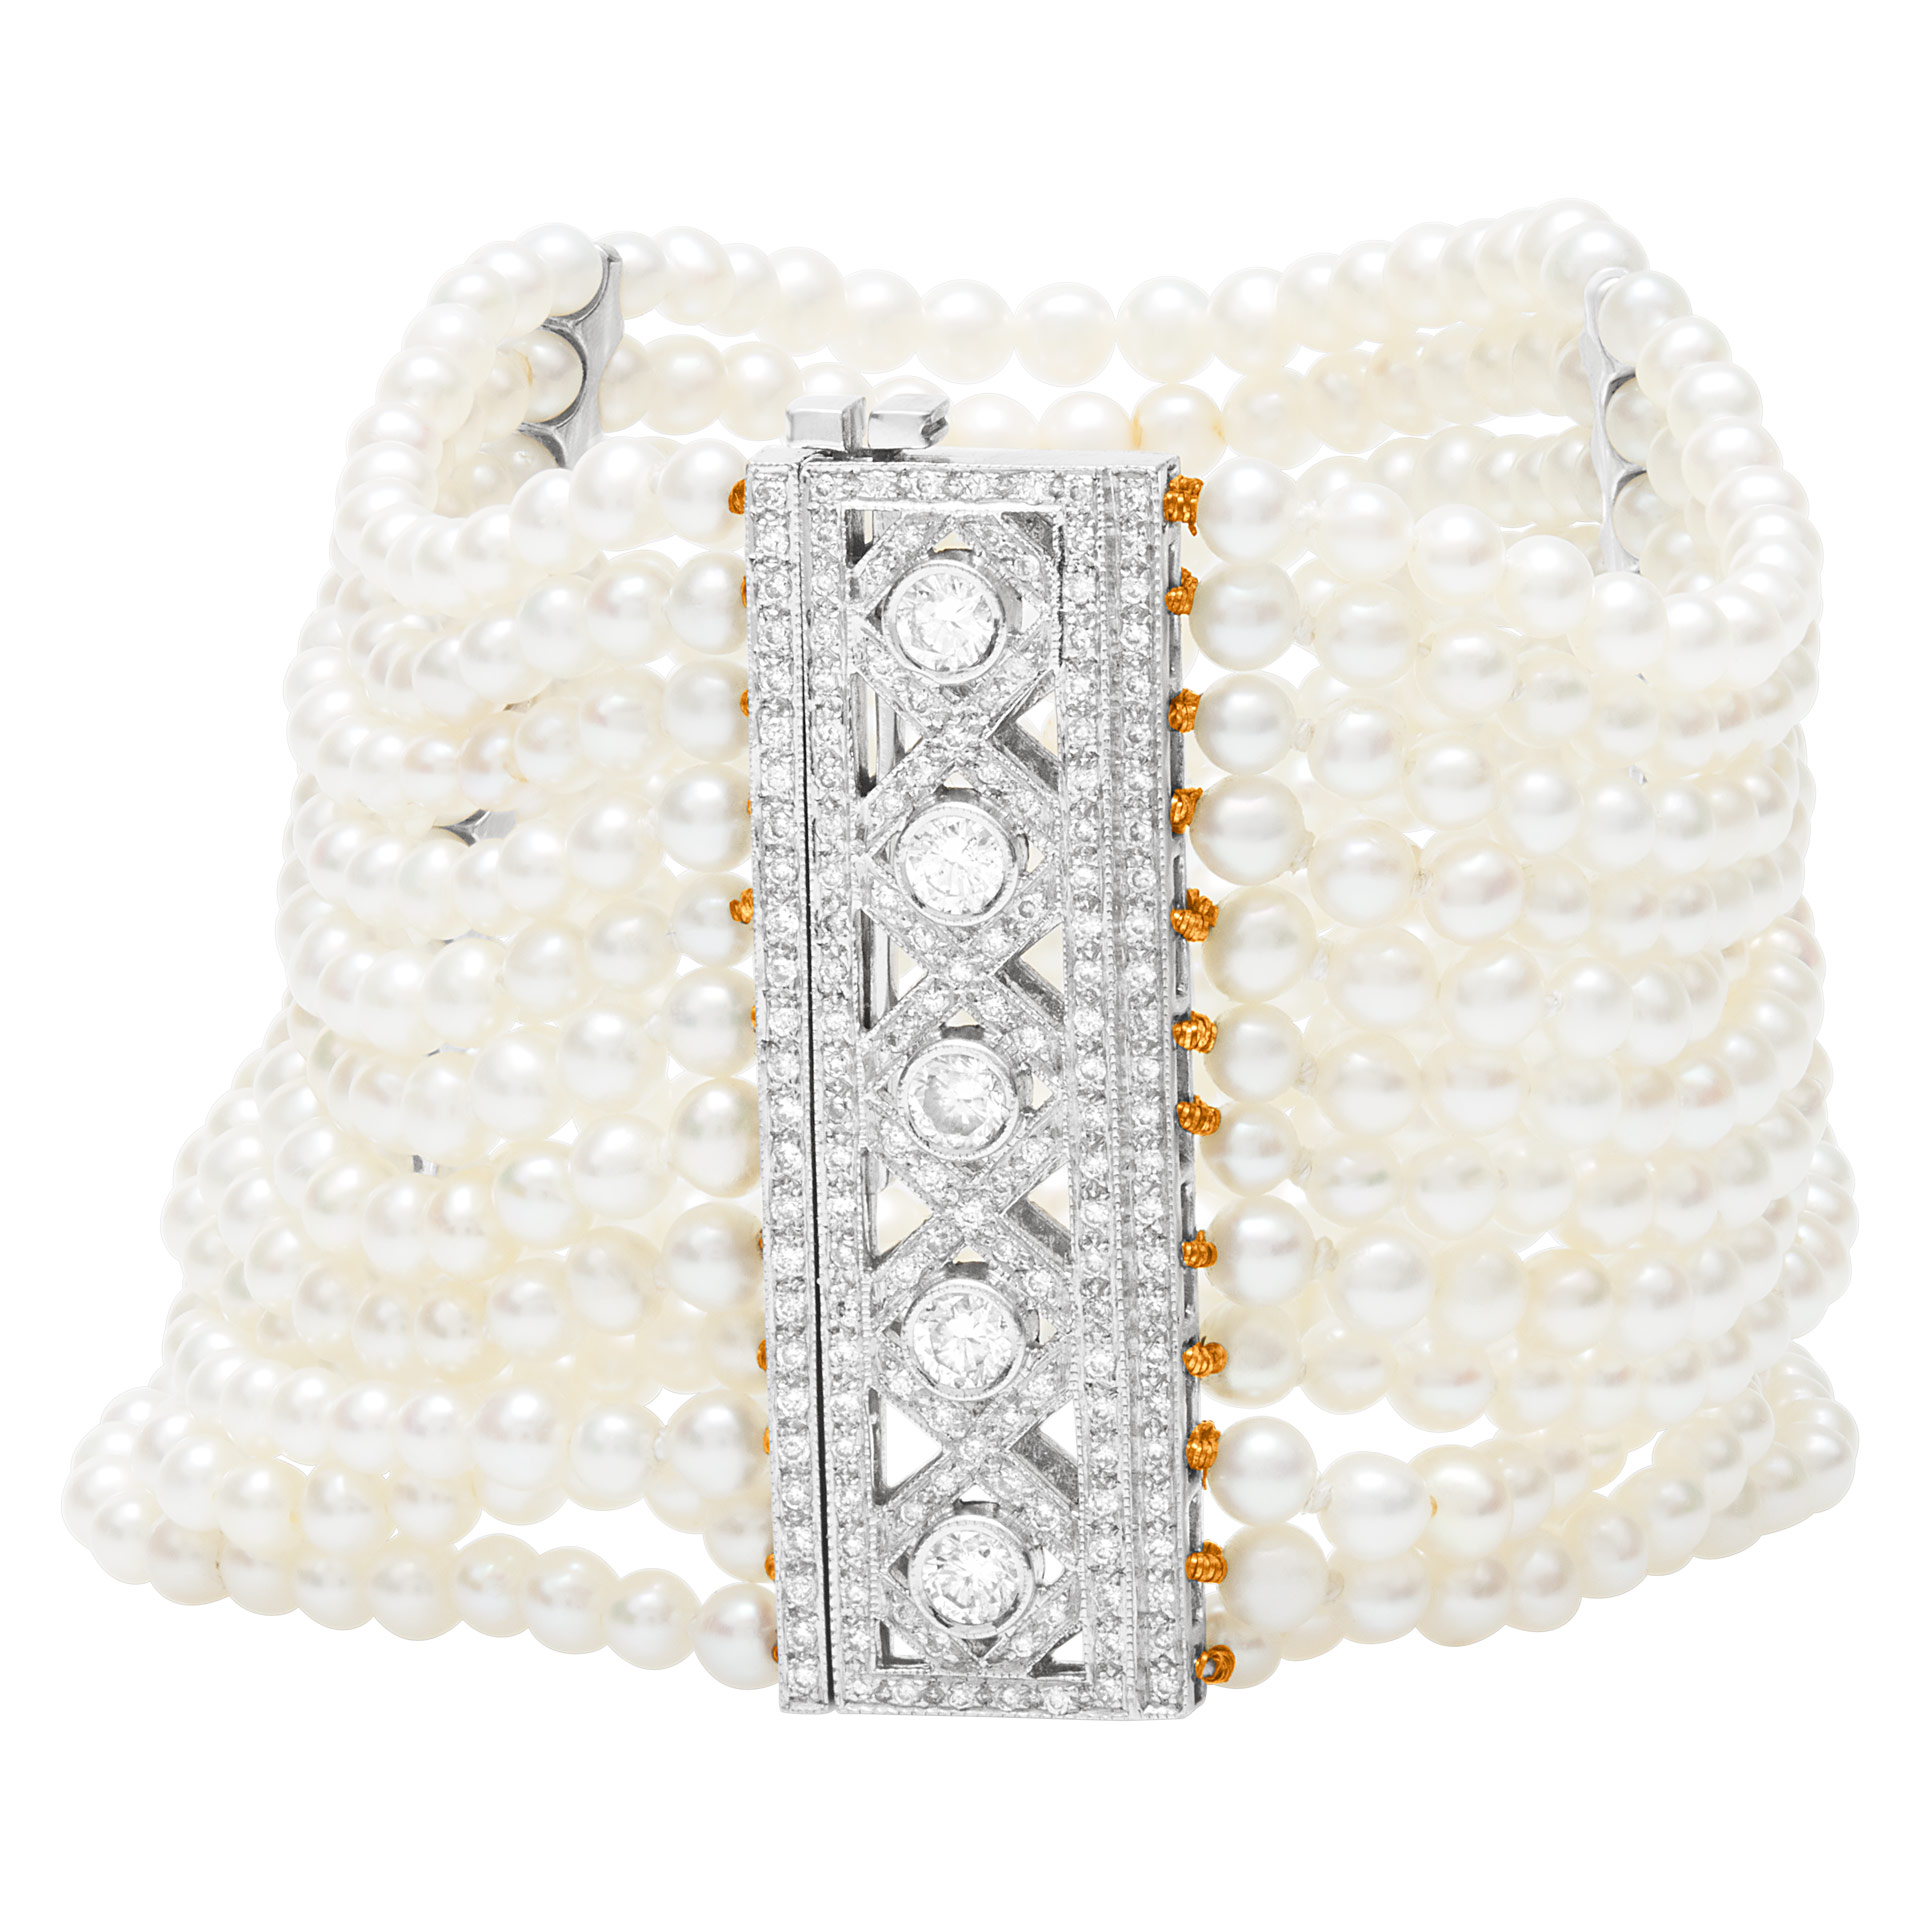 Seed pearl bracelet with approx. 0.60 cts in diamonds